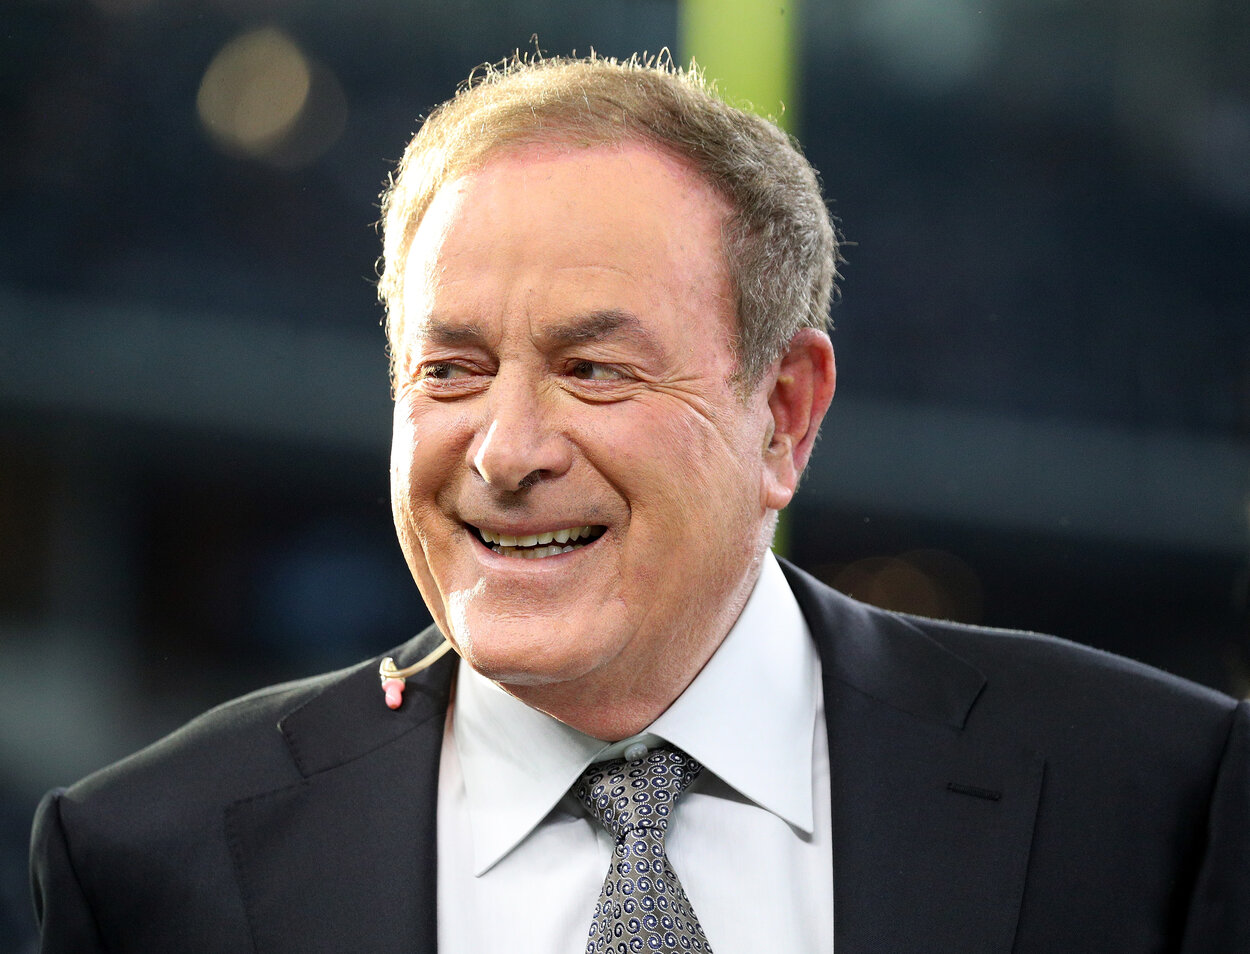 Al Michaels Cost Himself $5,000 With a Single Swing as a High School Student